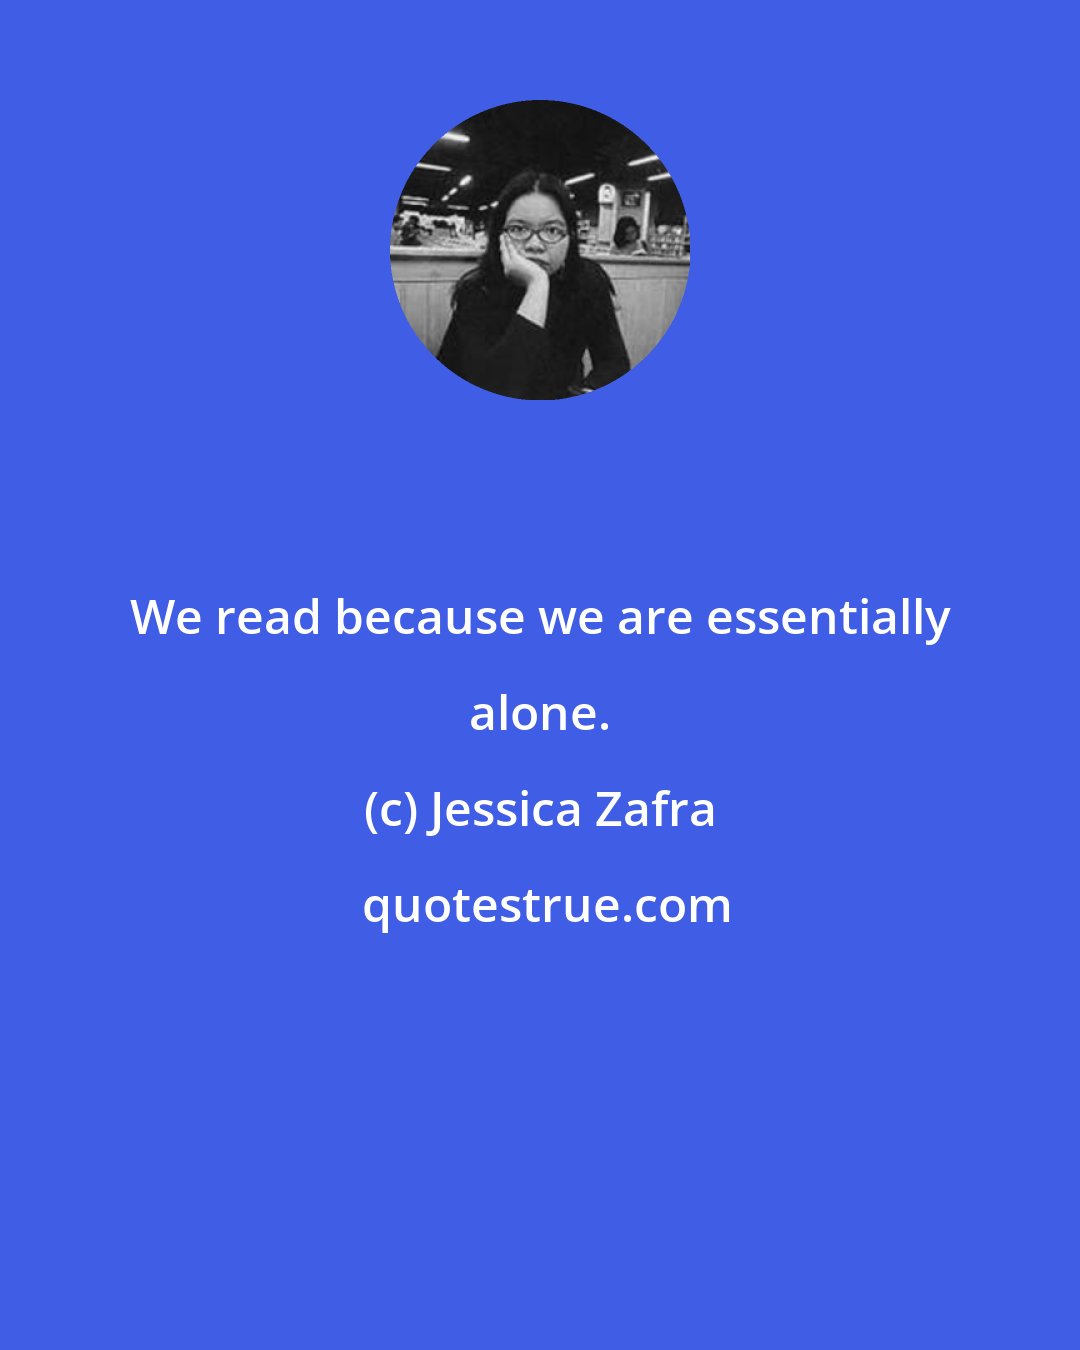 Jessica Zafra: We read because we are essentially alone.